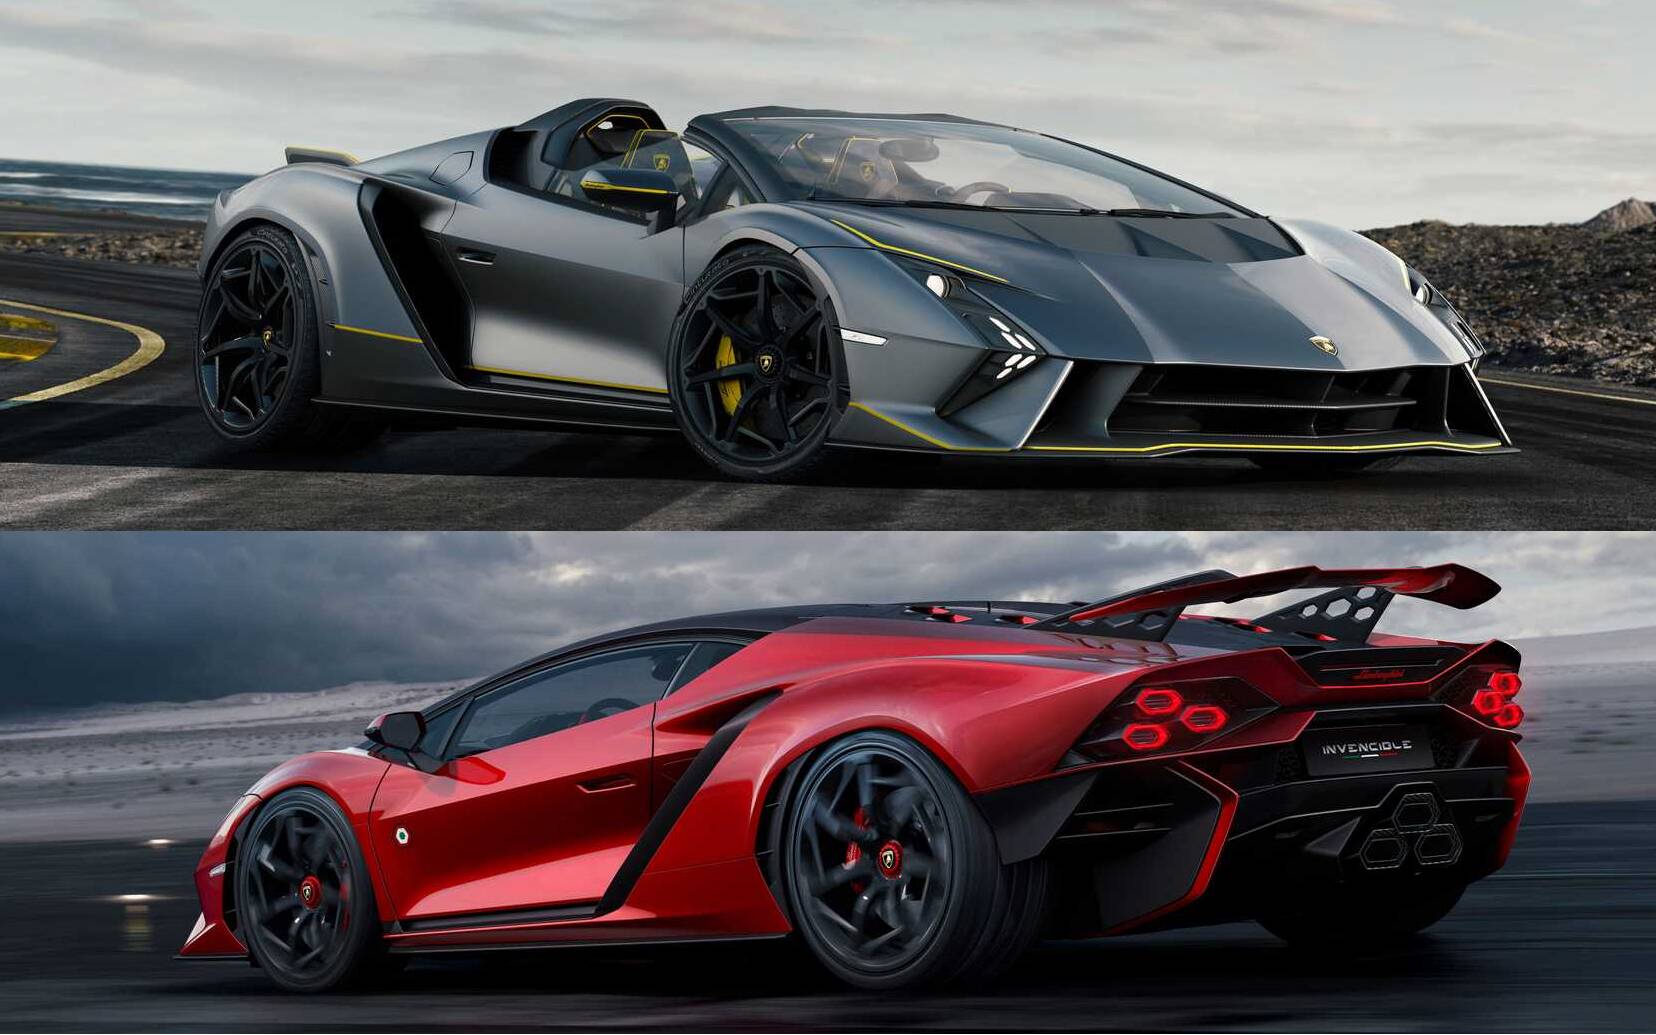 Two One-Off Supercars Bid Farewell to Pure V12 Lamborghinis - The Car Guide